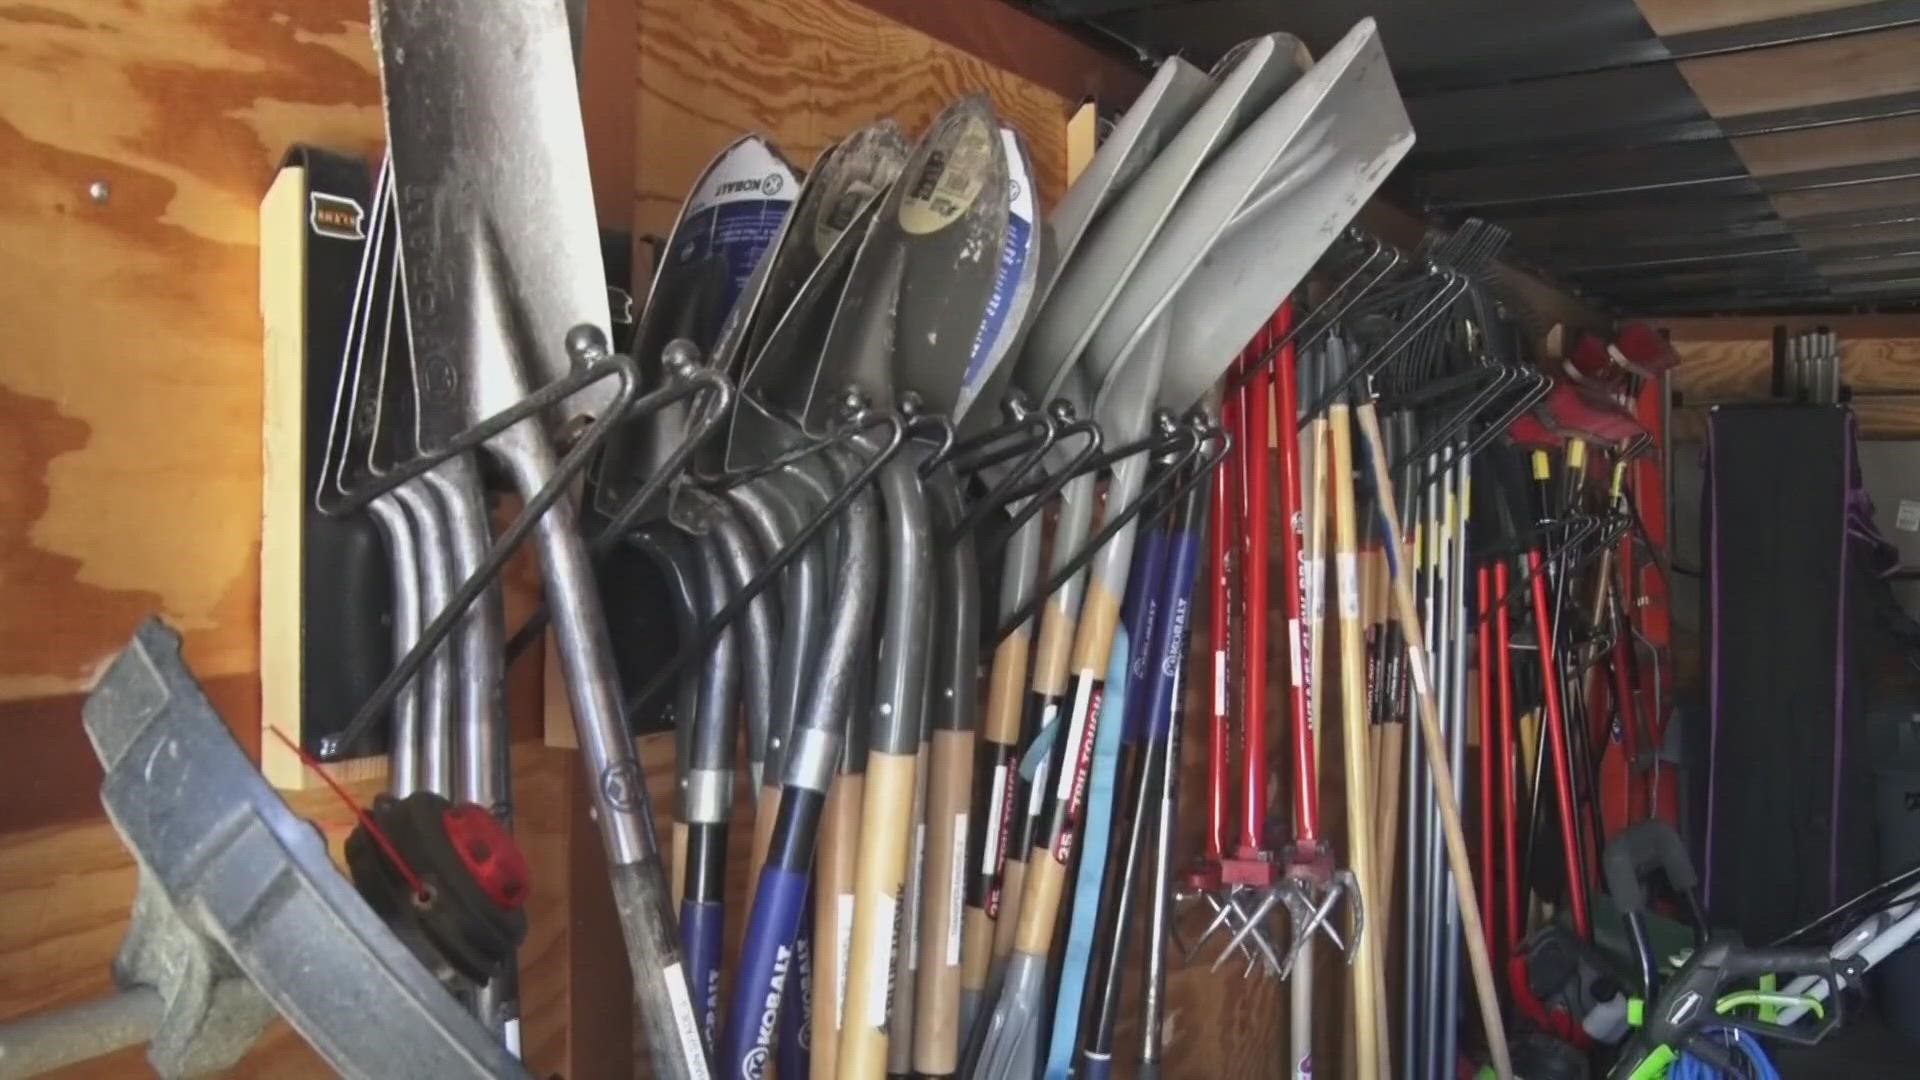 Don't have those tools for those pesky DIY projects? Check out the Temple Tool Library!